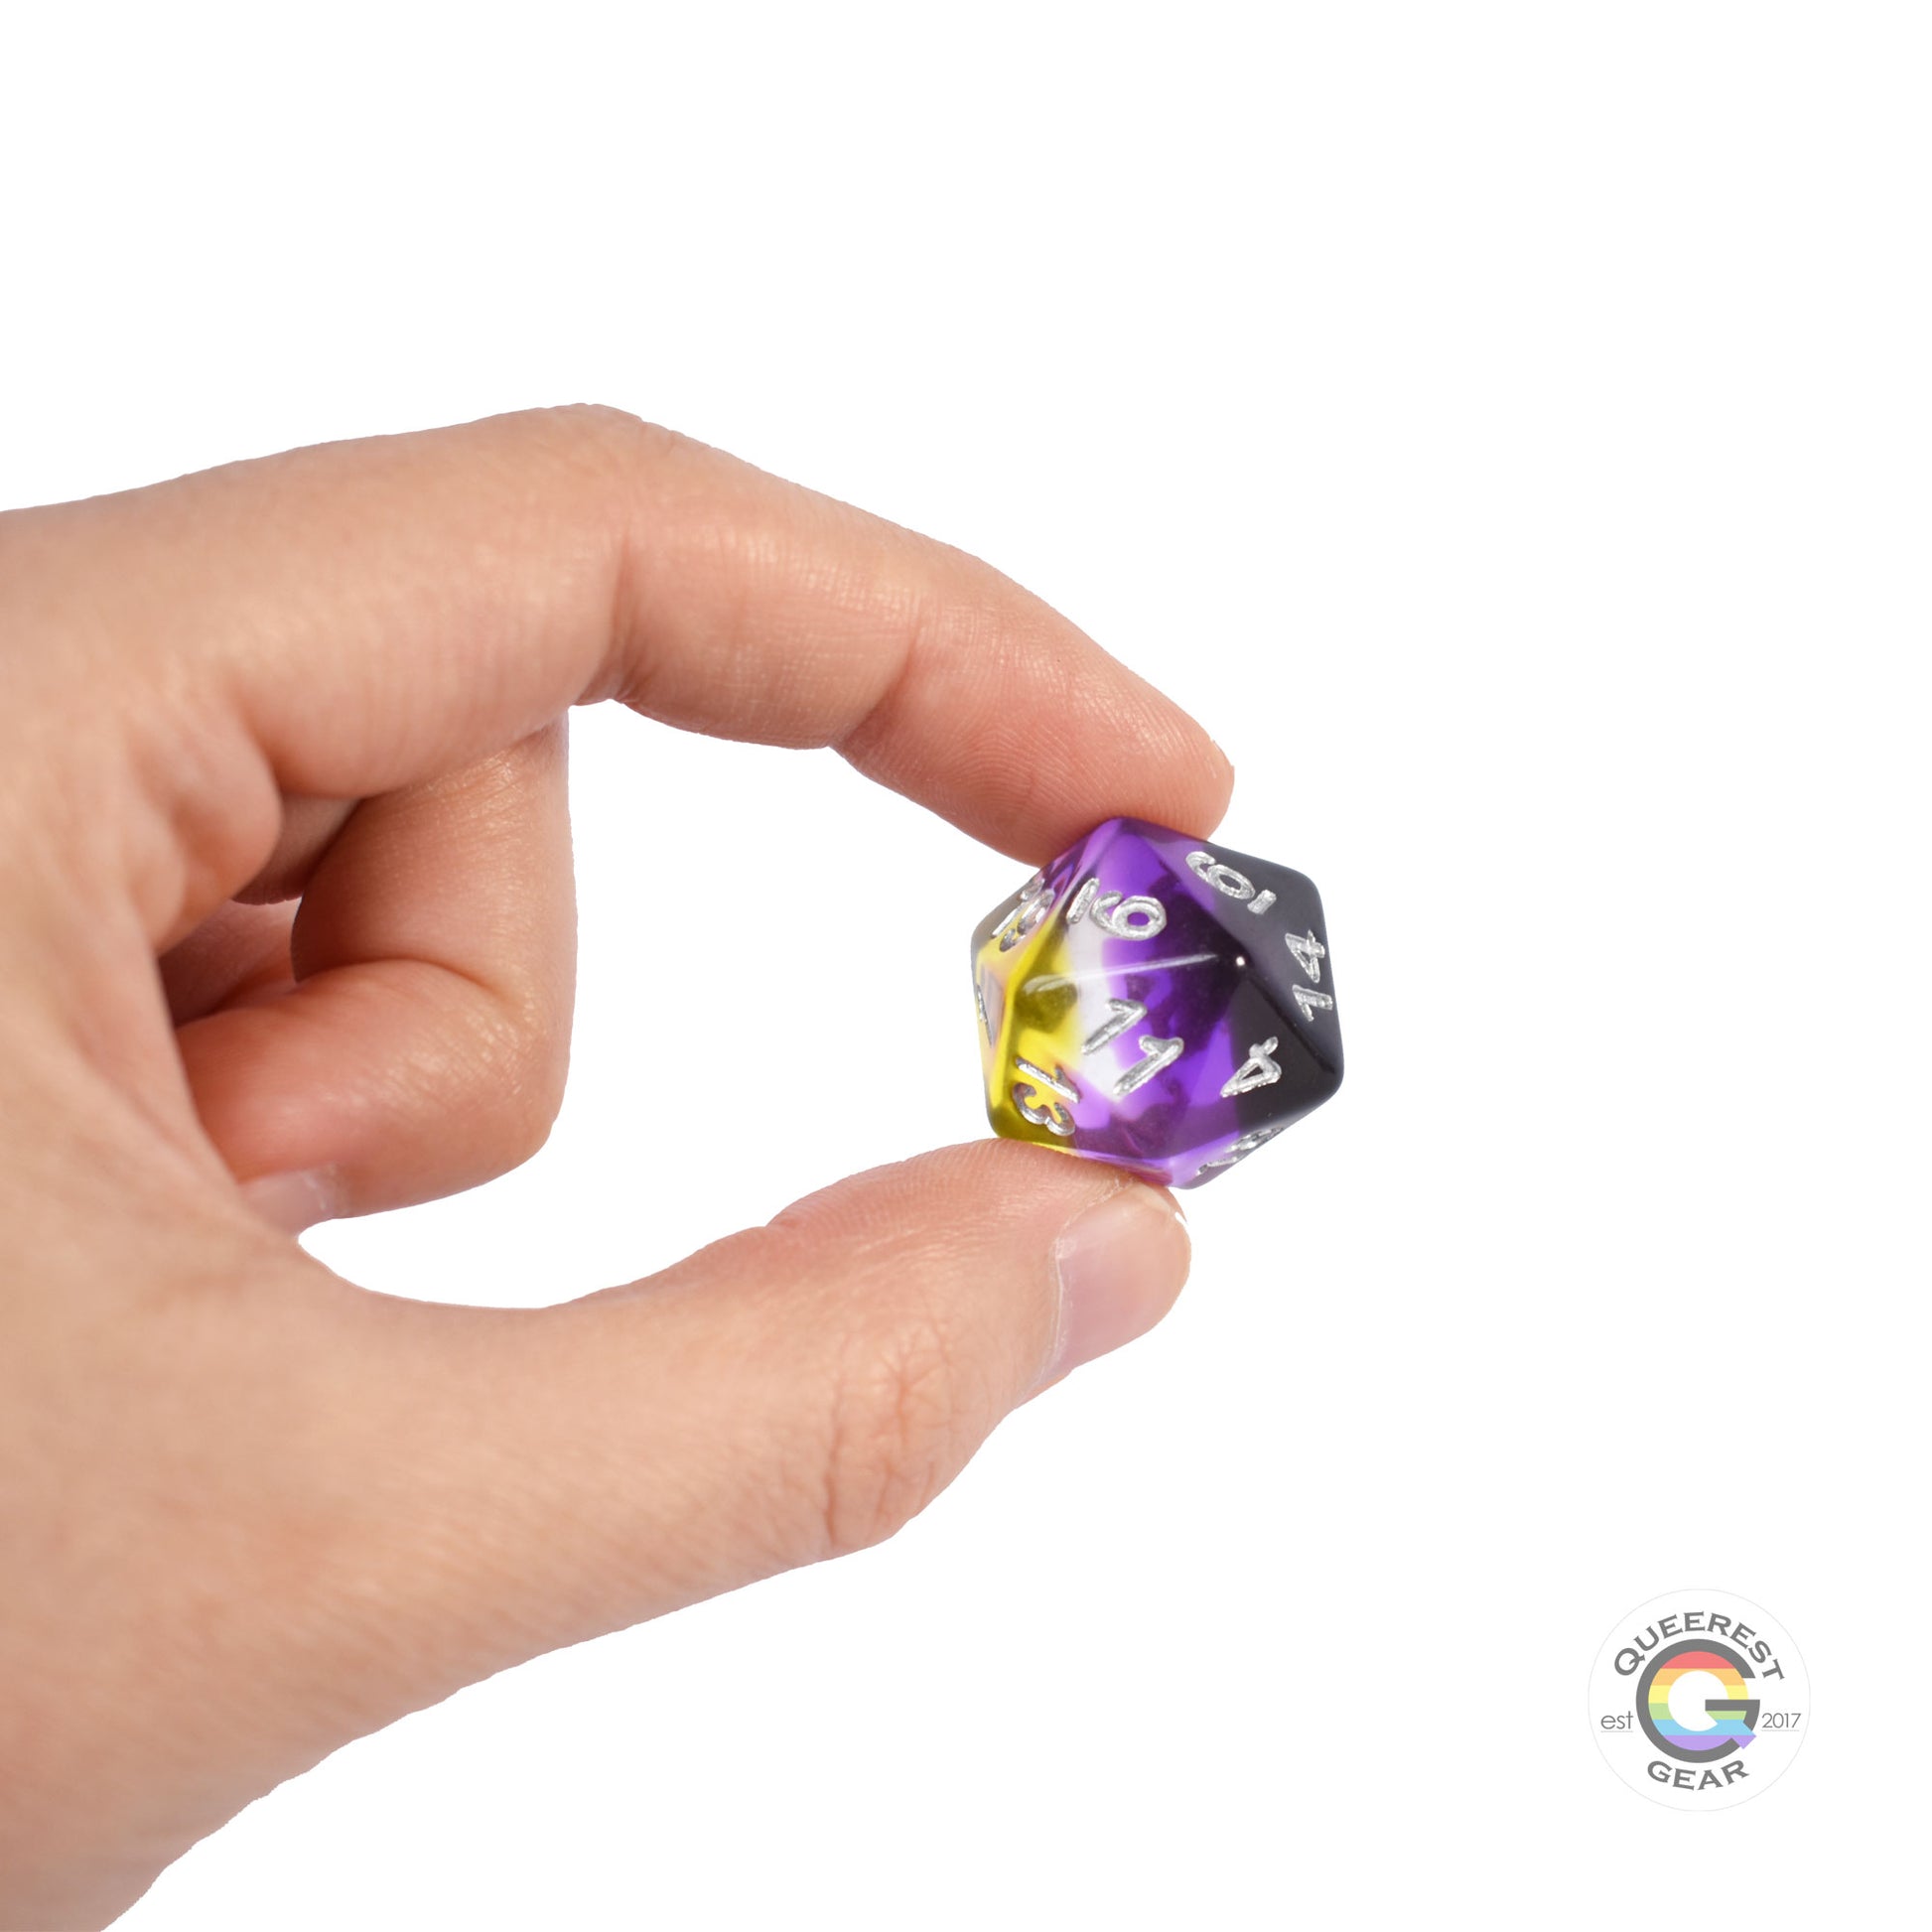 A hand holding up the nonbinary d20 to show off the color and transparency